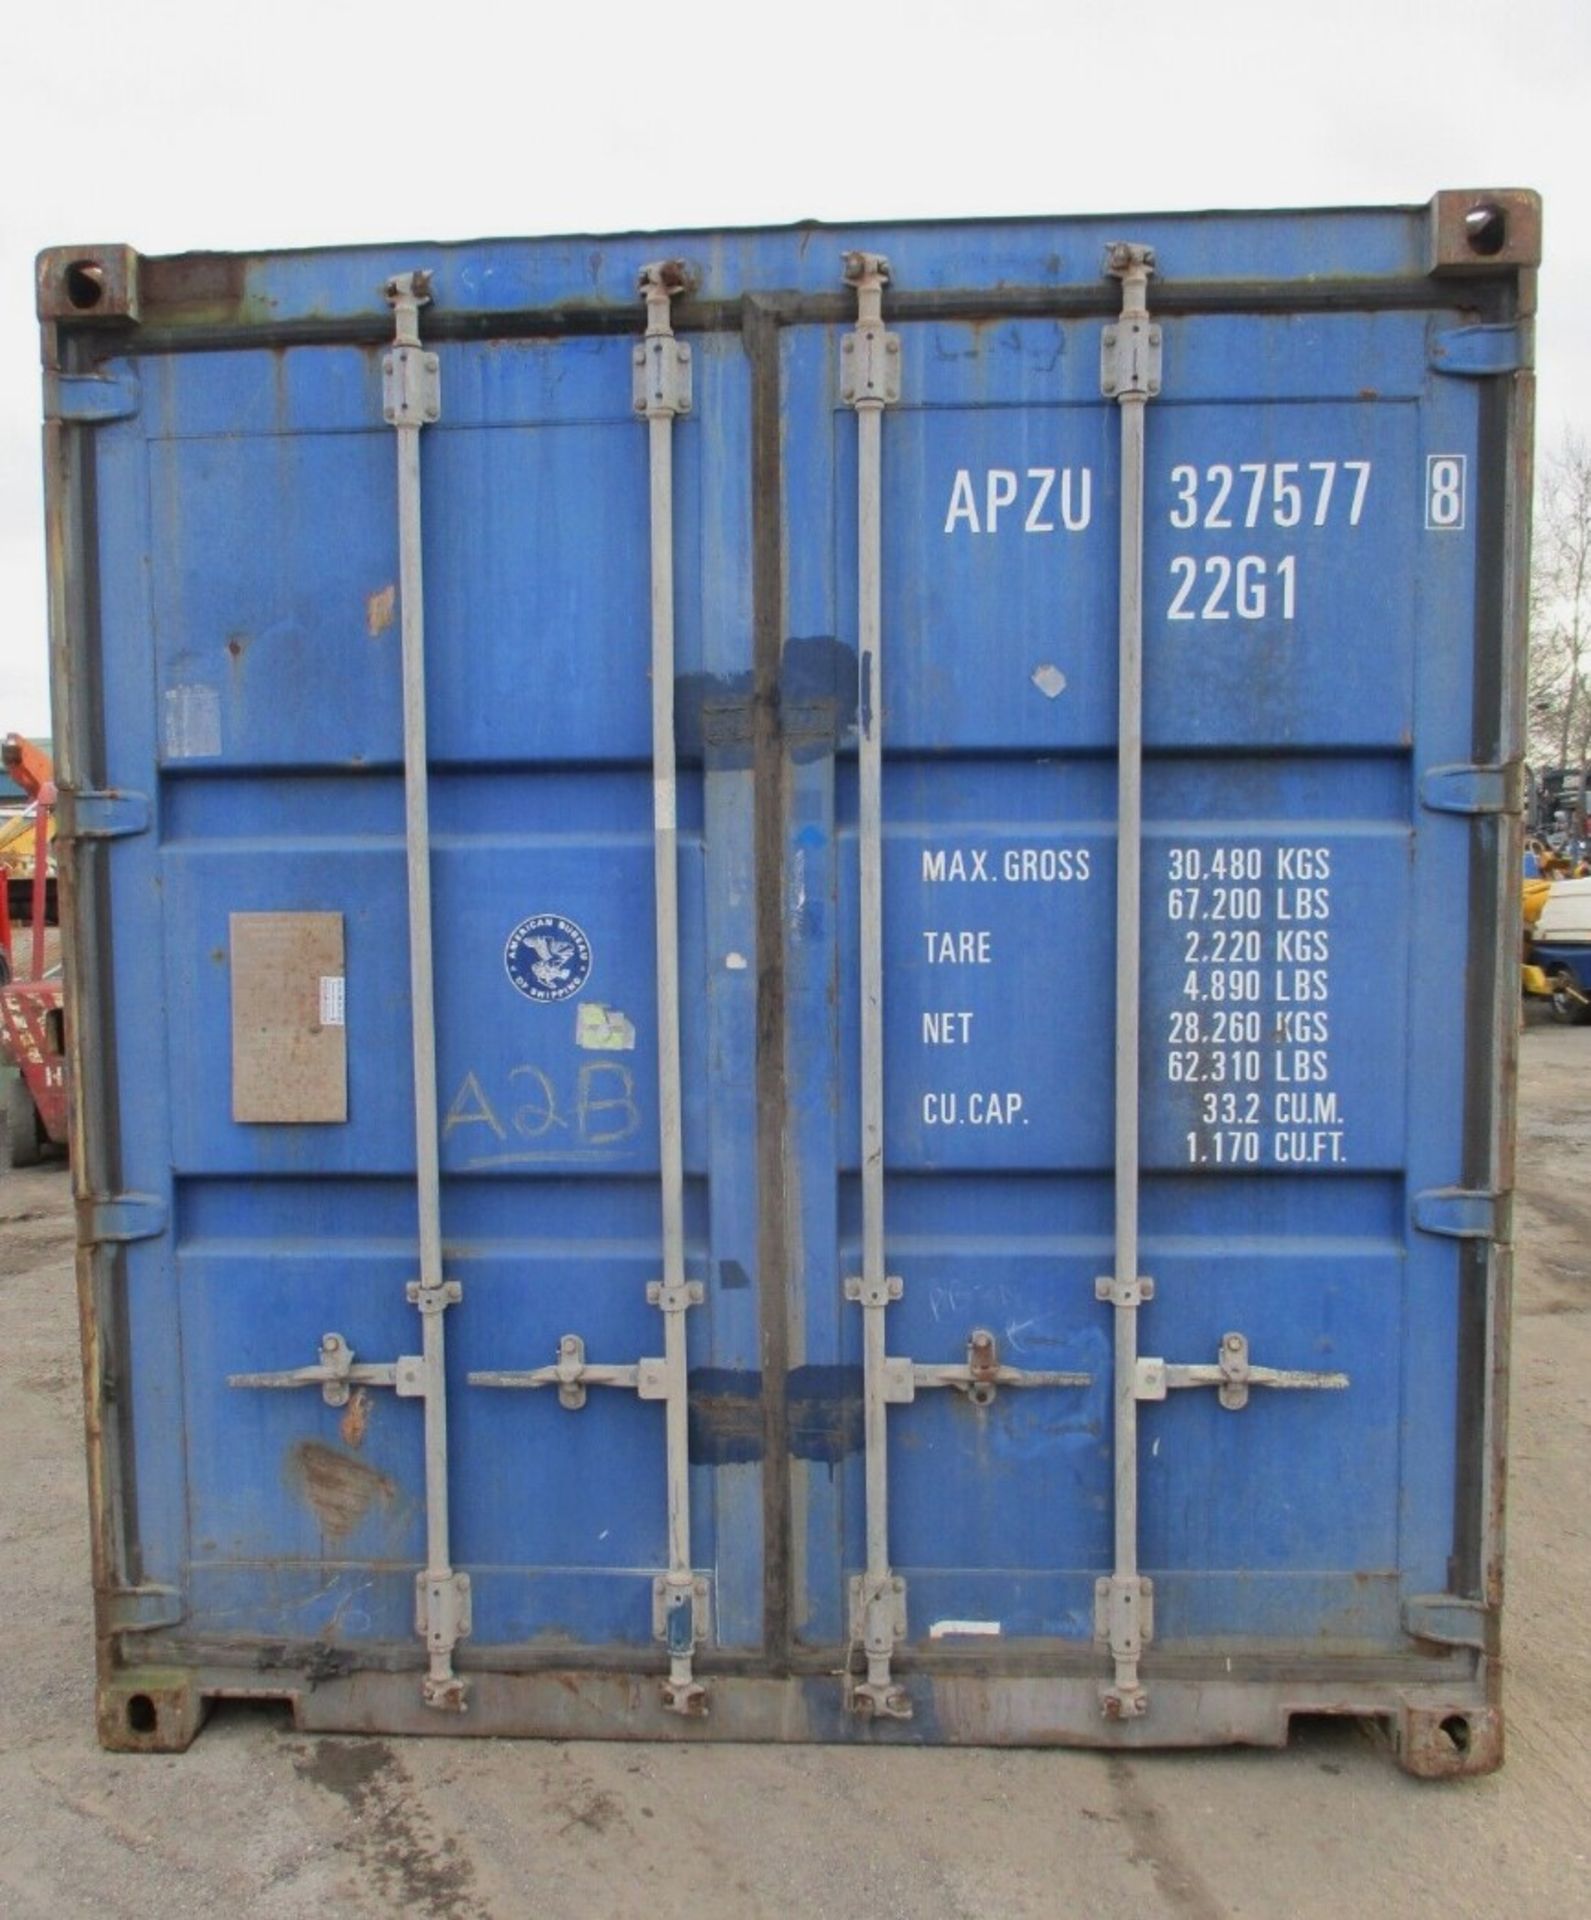 20 FEET LONG X 8 FEET WIDE SHIPPING CONTAINER: VERSATILE STORAGE SOLUTION - Image 7 of 10